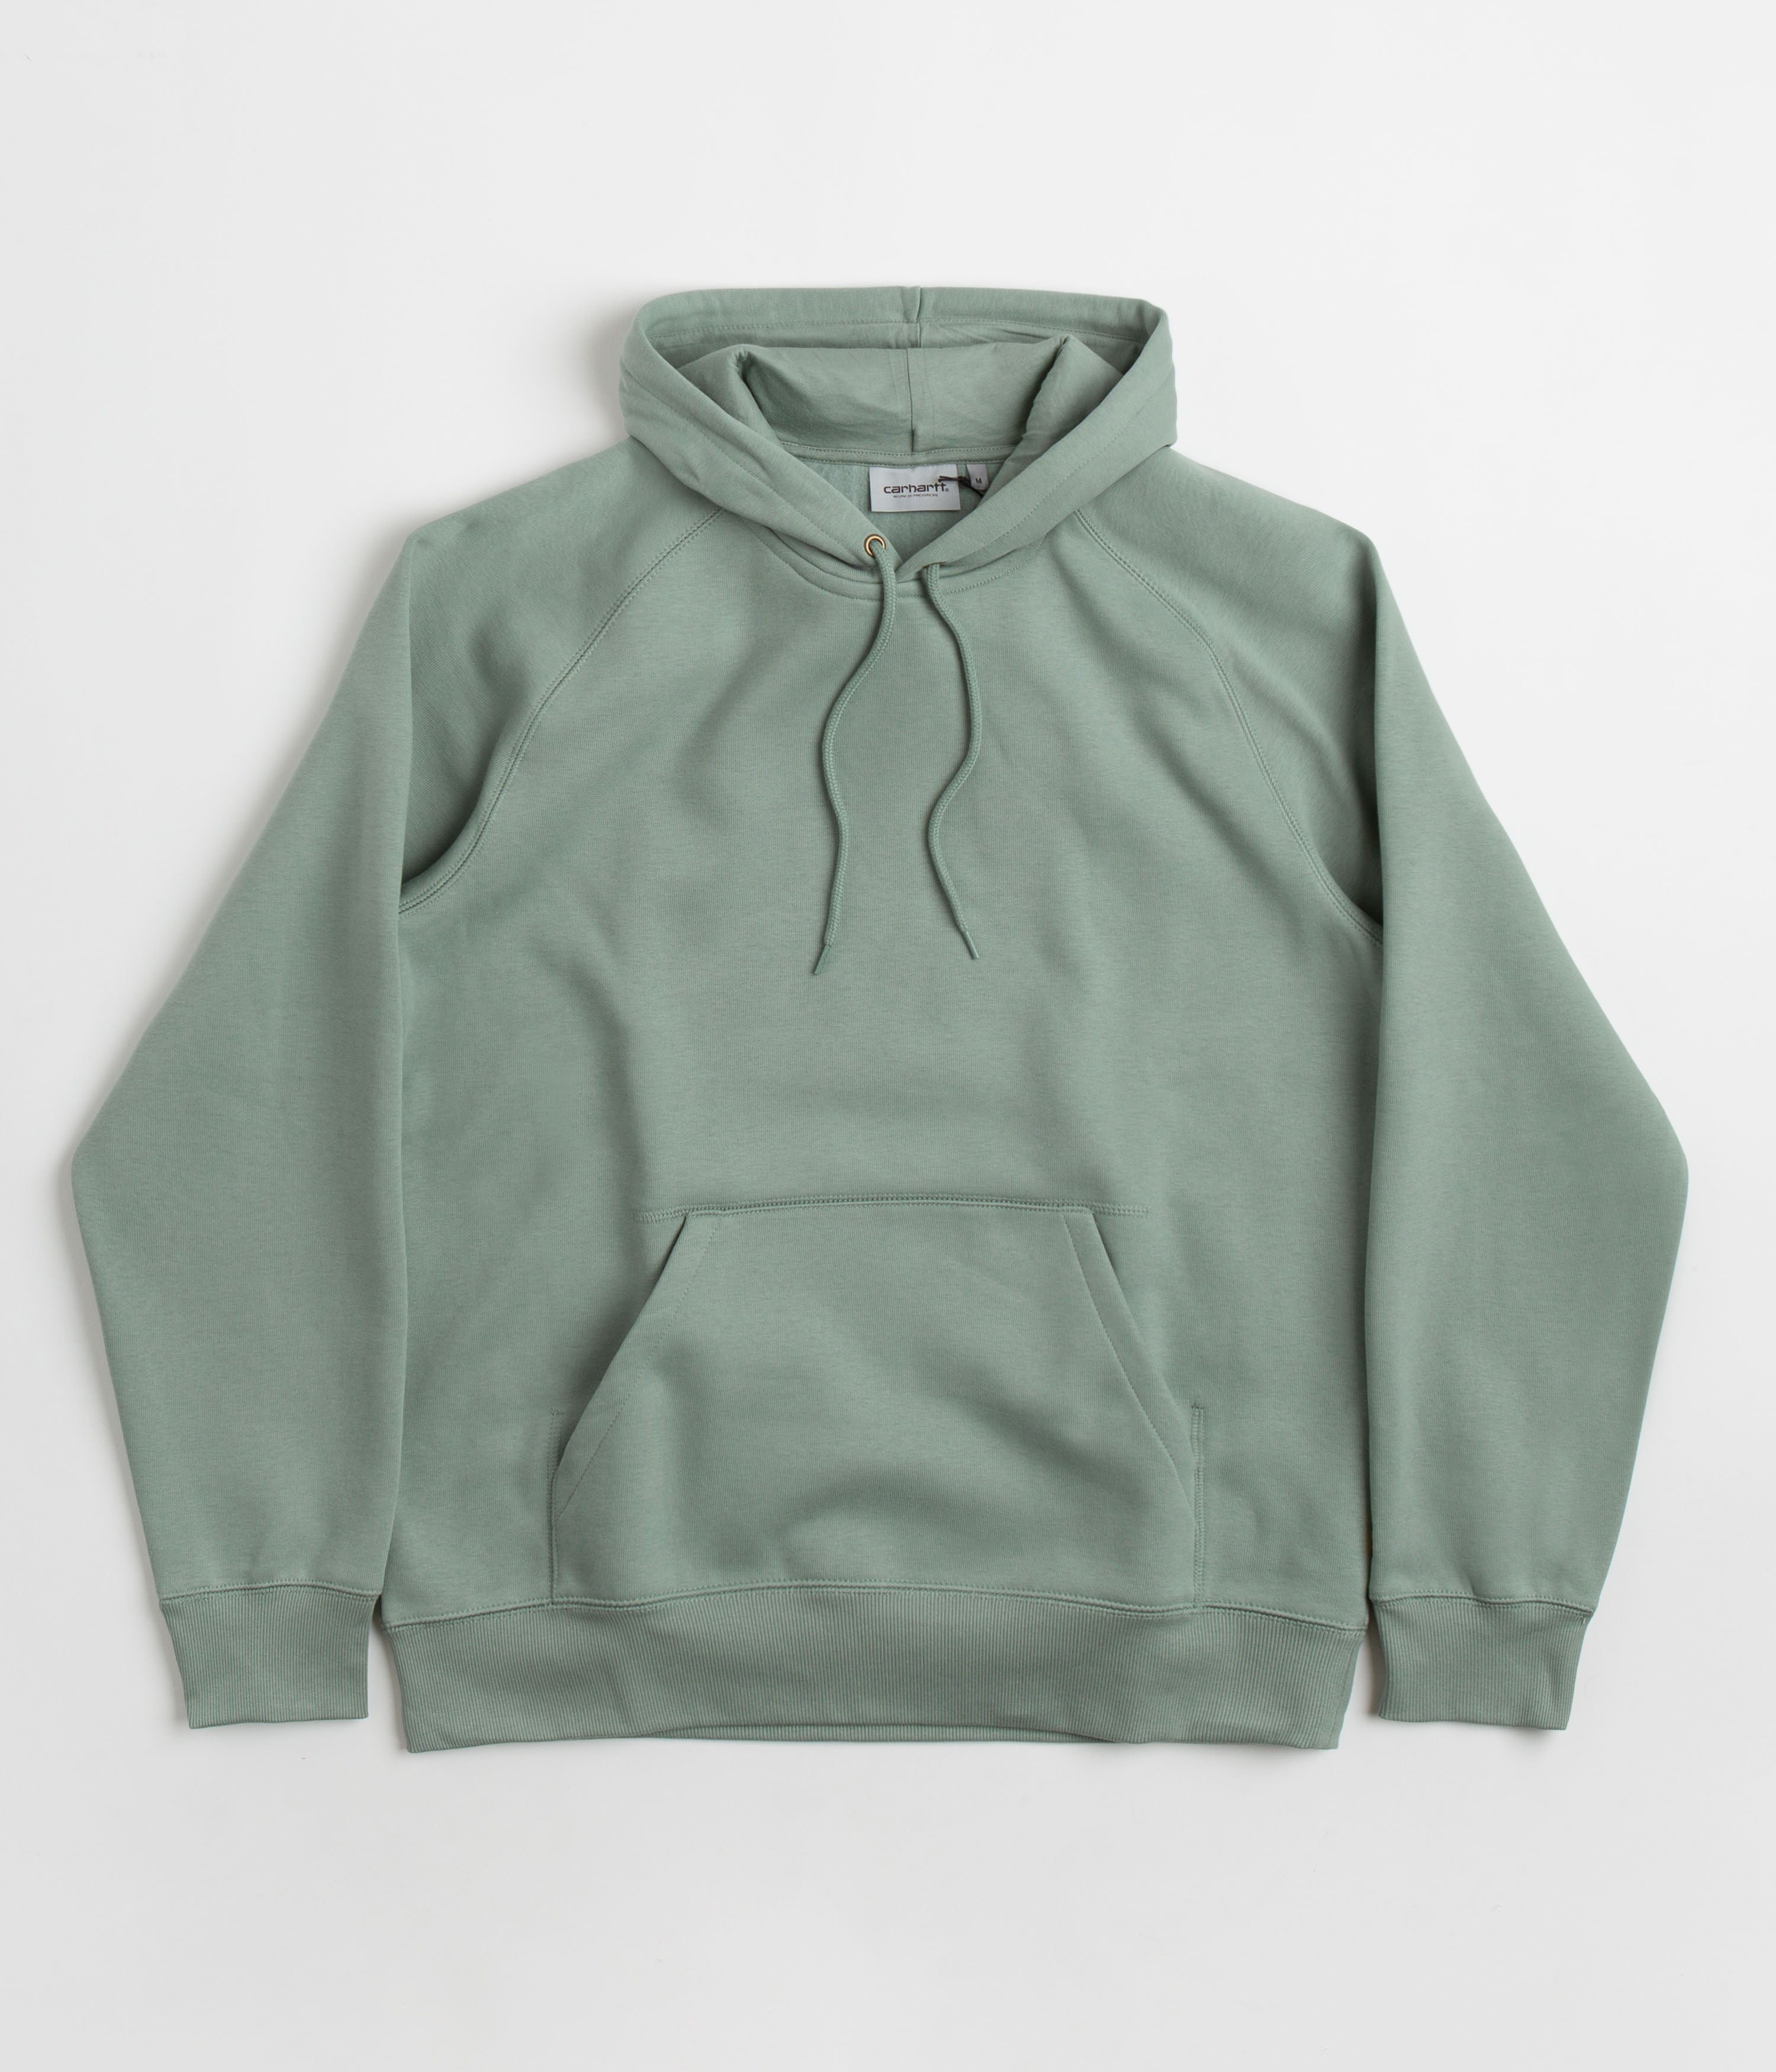 Carhartt Chase Hoodie - Glassy Teal / Gold | Flatspot